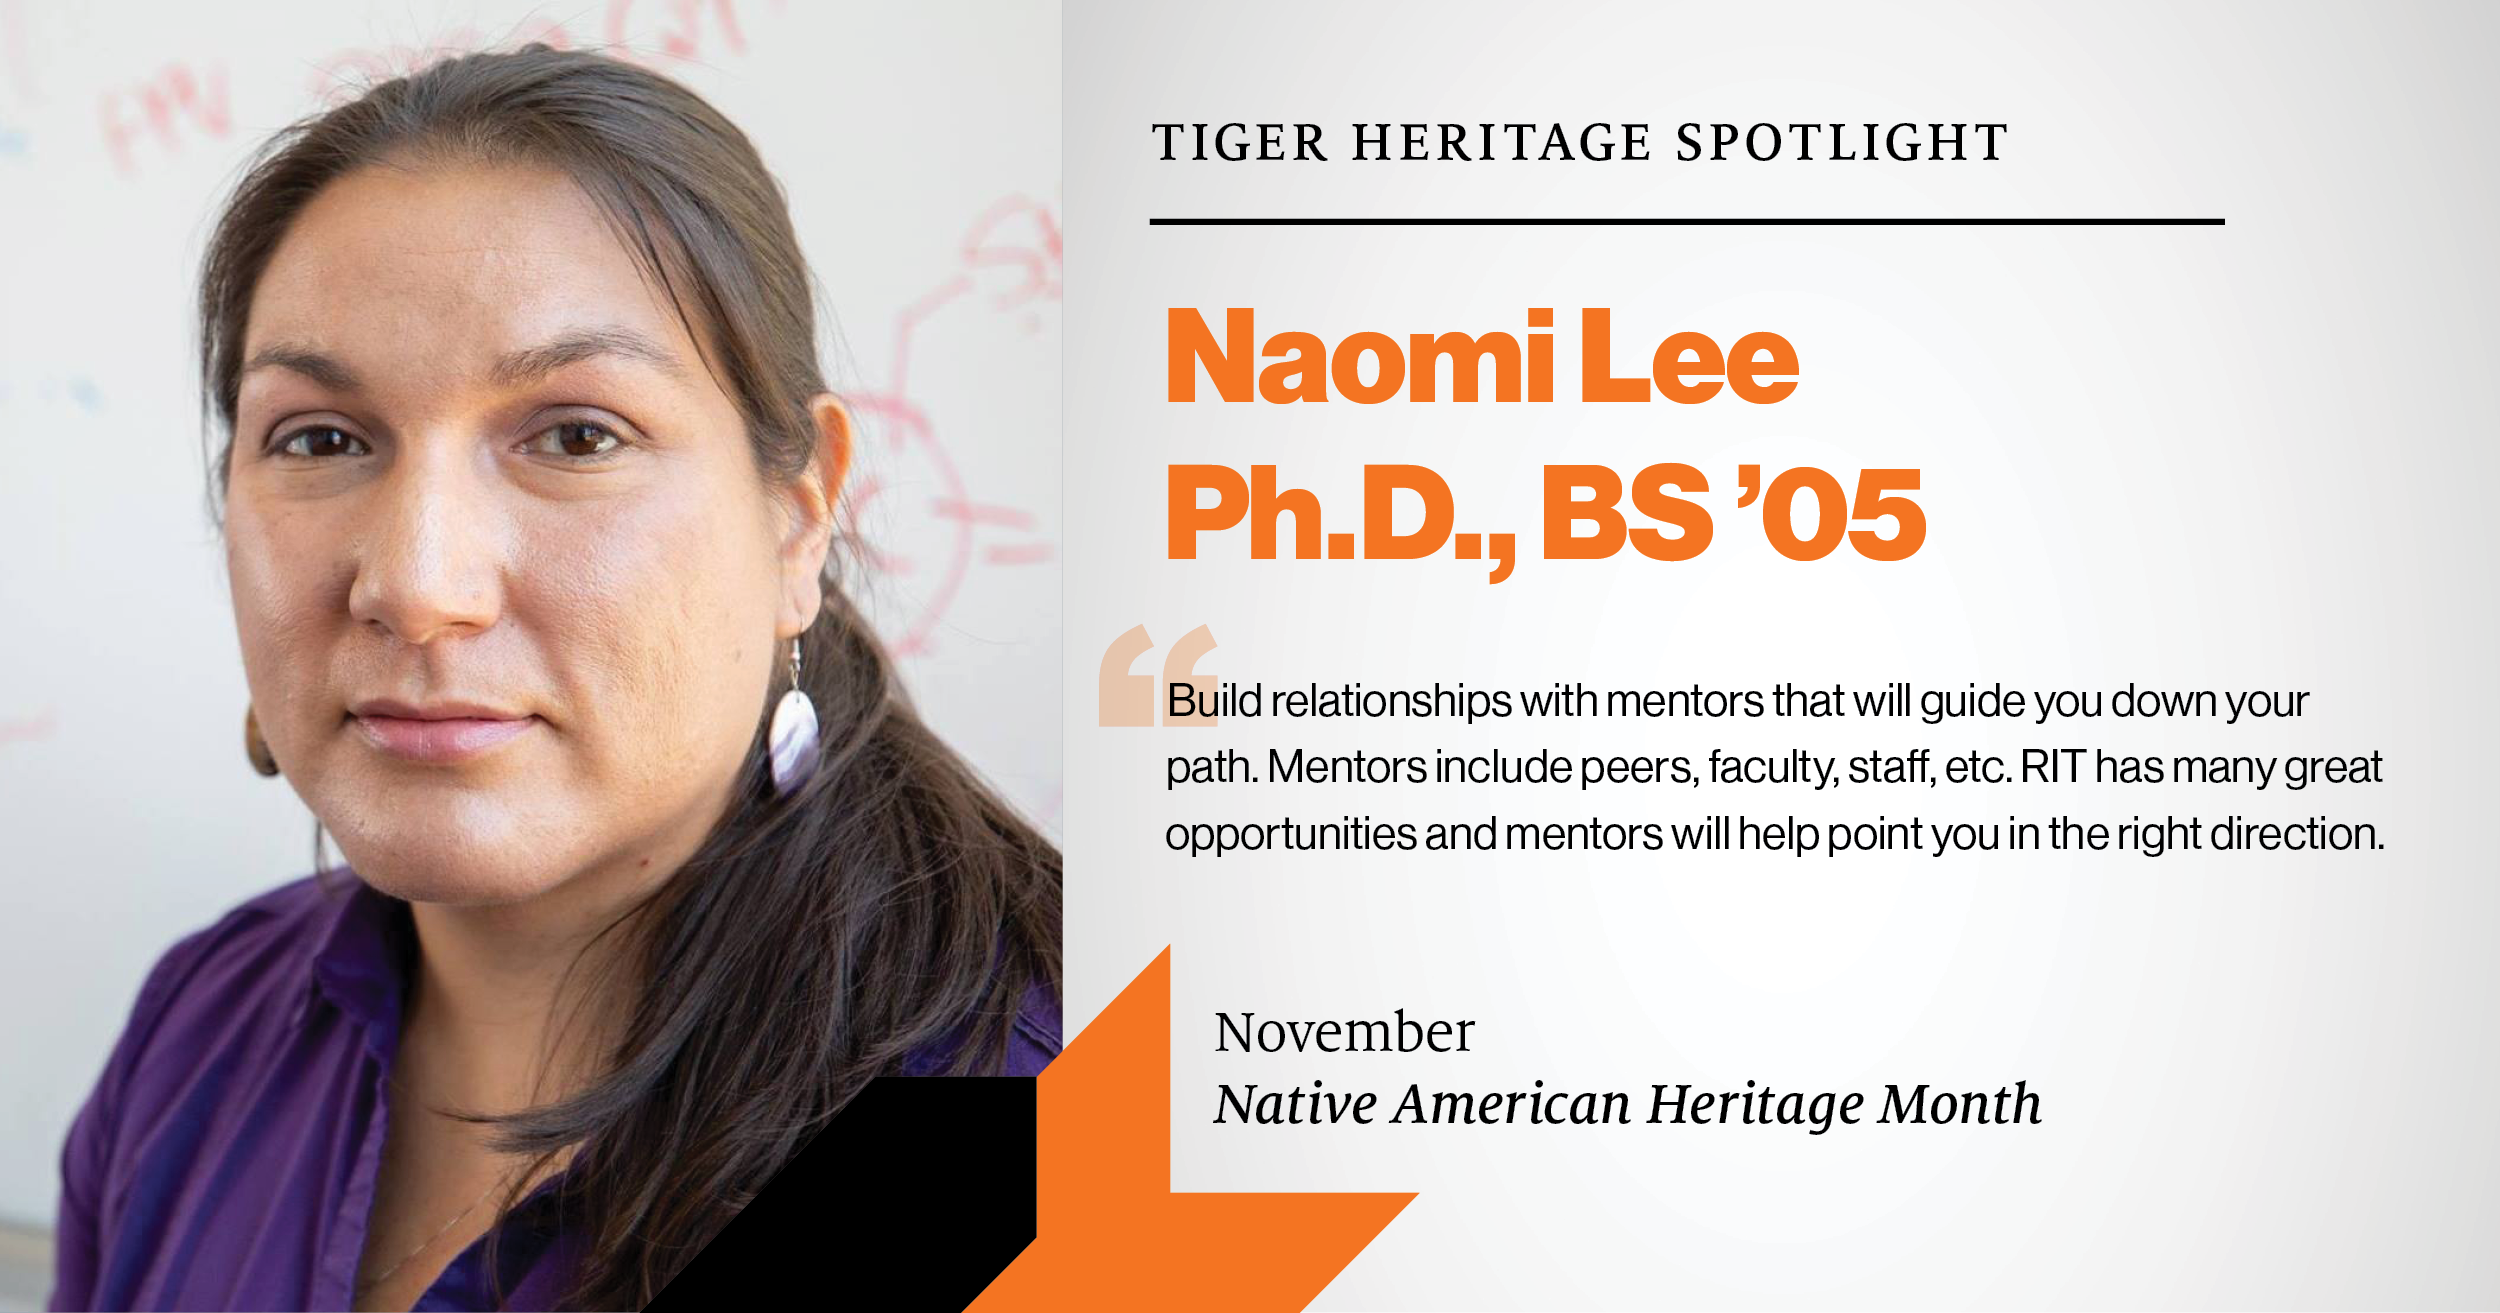 Naomi Lee, PH.D., BS '05 November Native American Heritage Month Spotlight Build relationships with mentors that will guide you down your path. Mentors include peers, faculty, staff, etc. RIT has many great opportunities and mentors will help point you in the right direction.